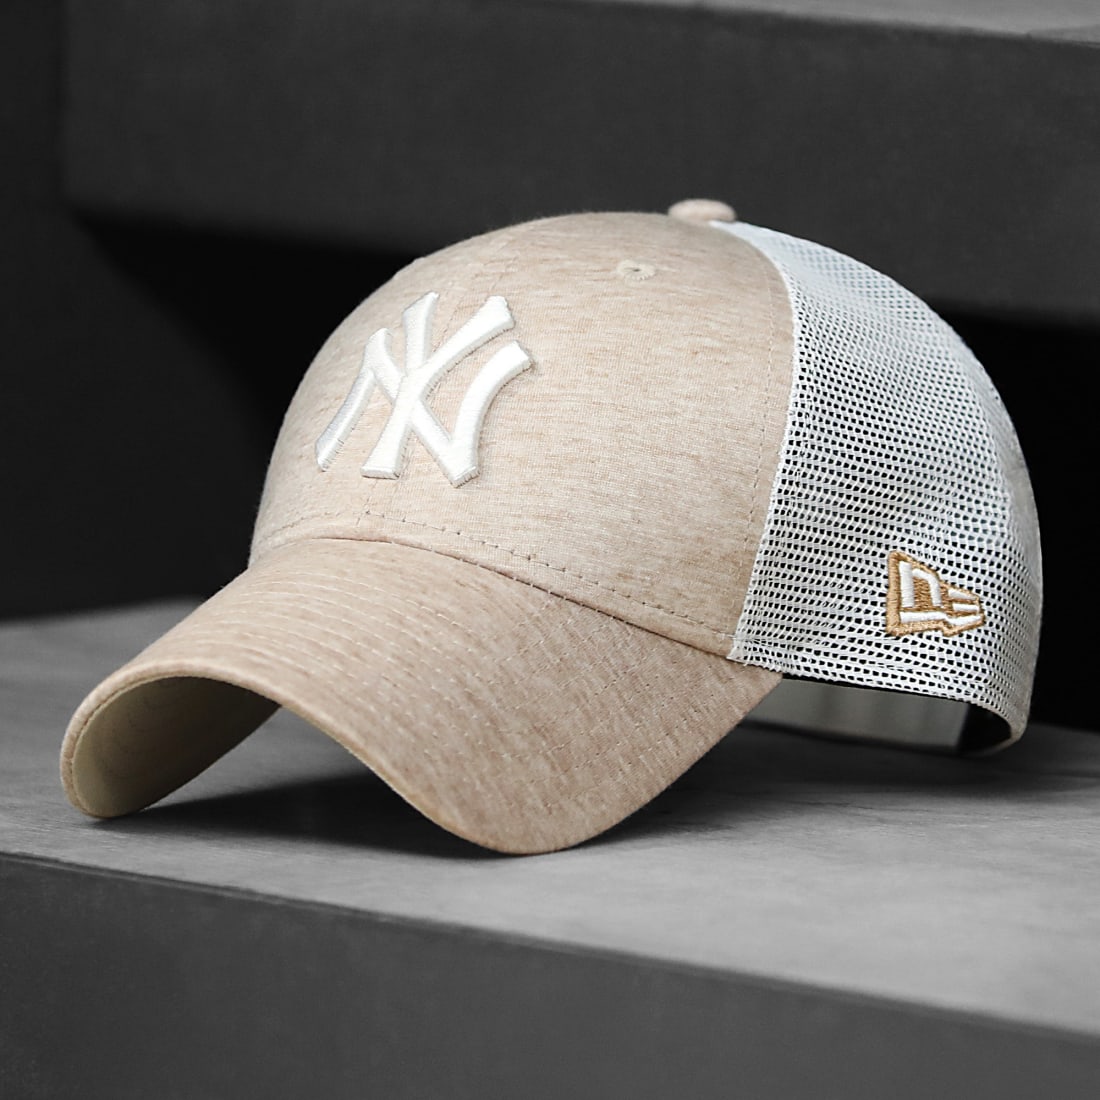 New Era Casquette Trucker 9forty Home Field 60137702 New York Yankees